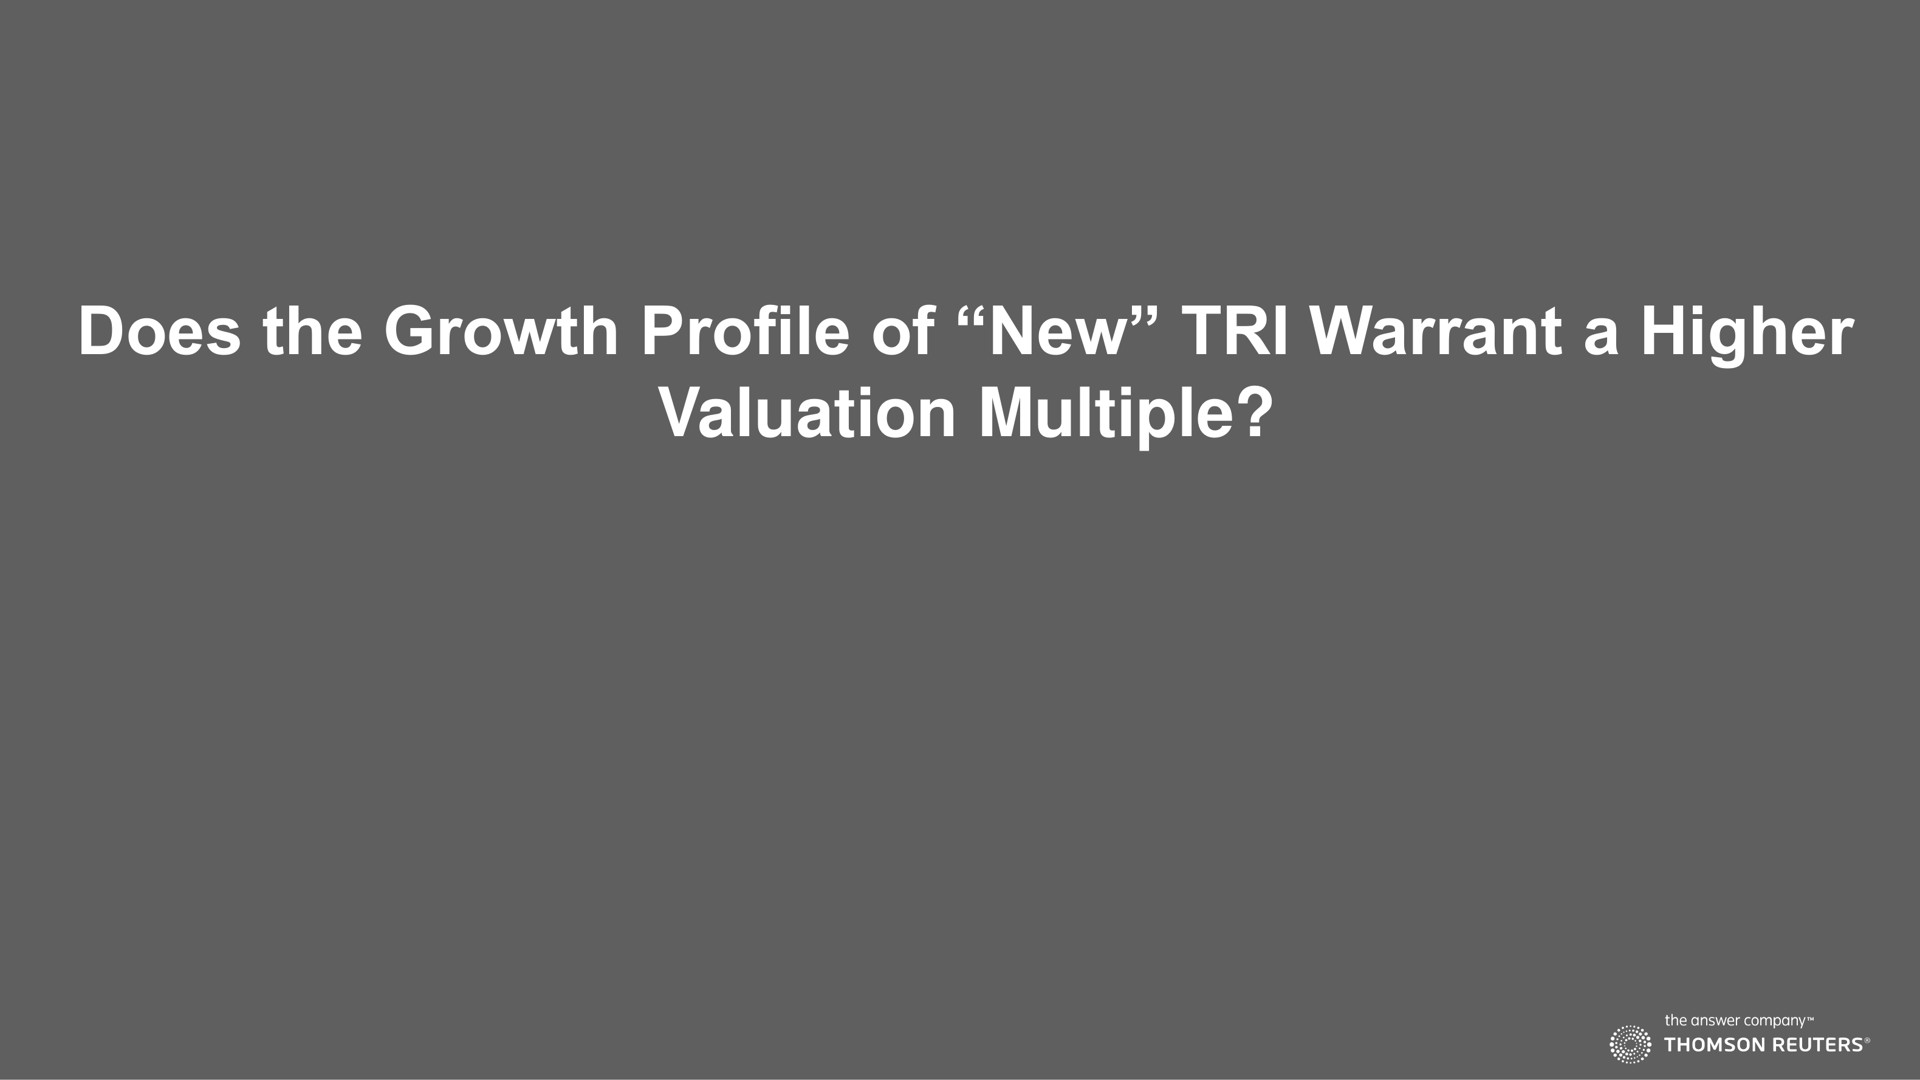 does the growth profile of new tri warrant a higher valuation multiple | Thomson Reuters